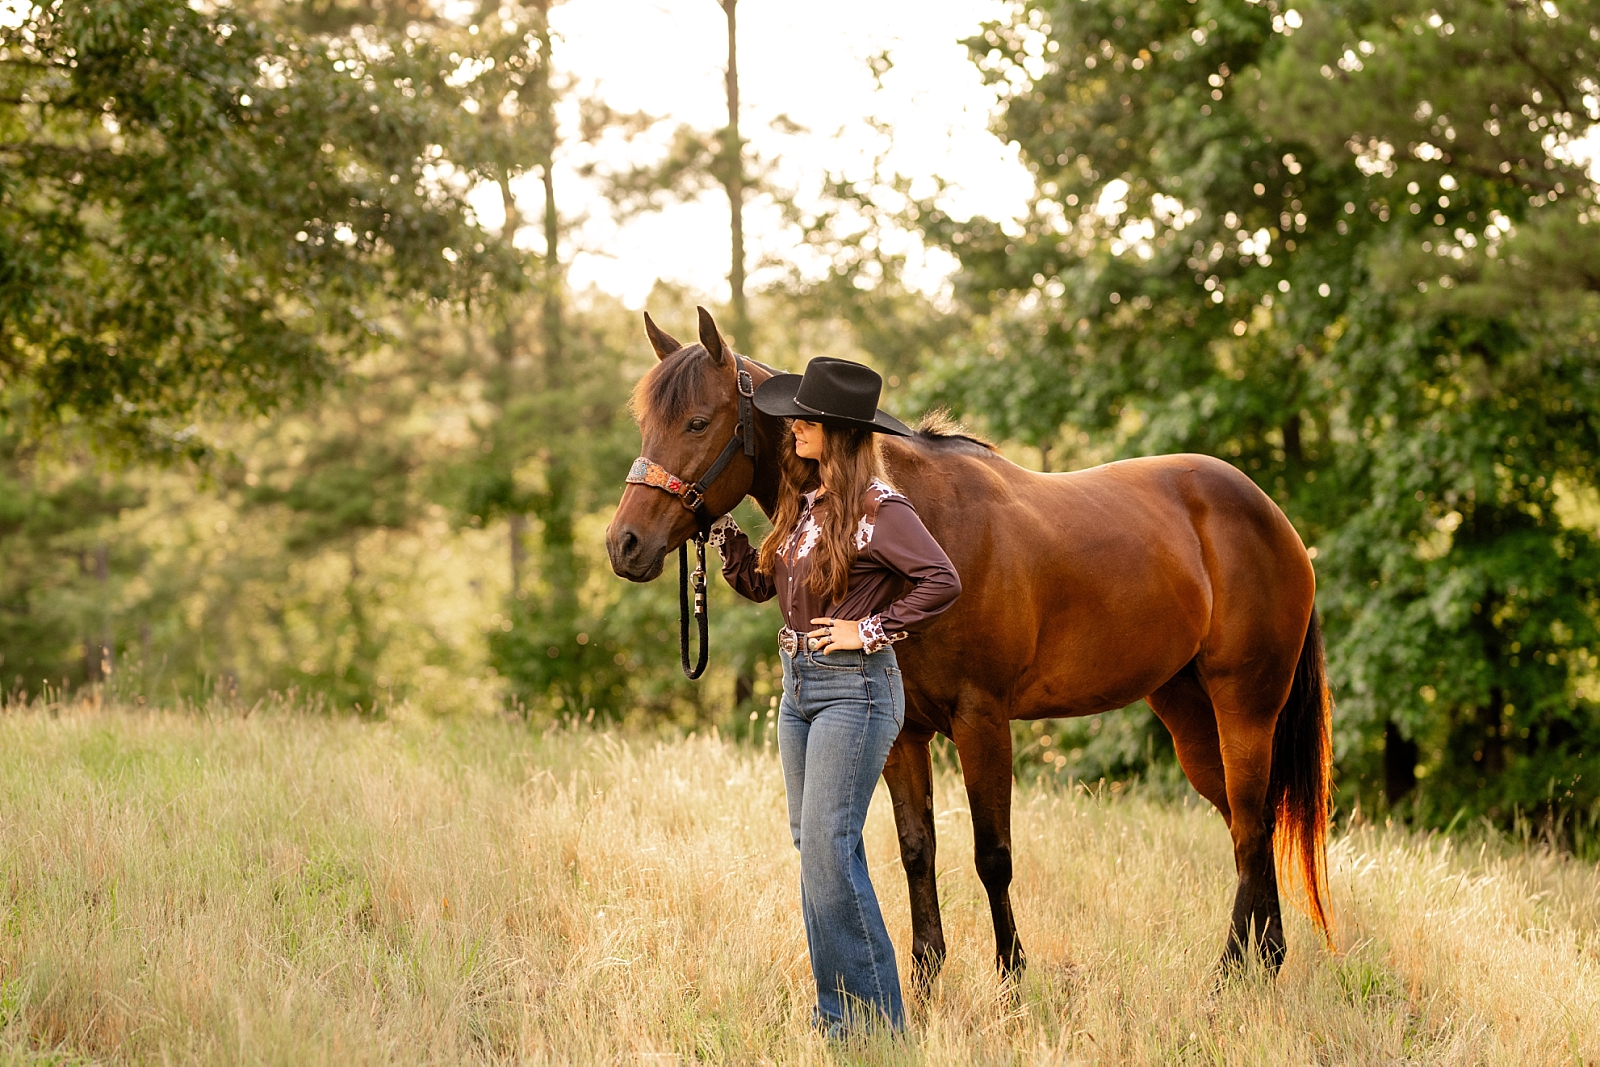 Barrel racer poses with her horse wearing cowgirl hat and cow hide shirt.